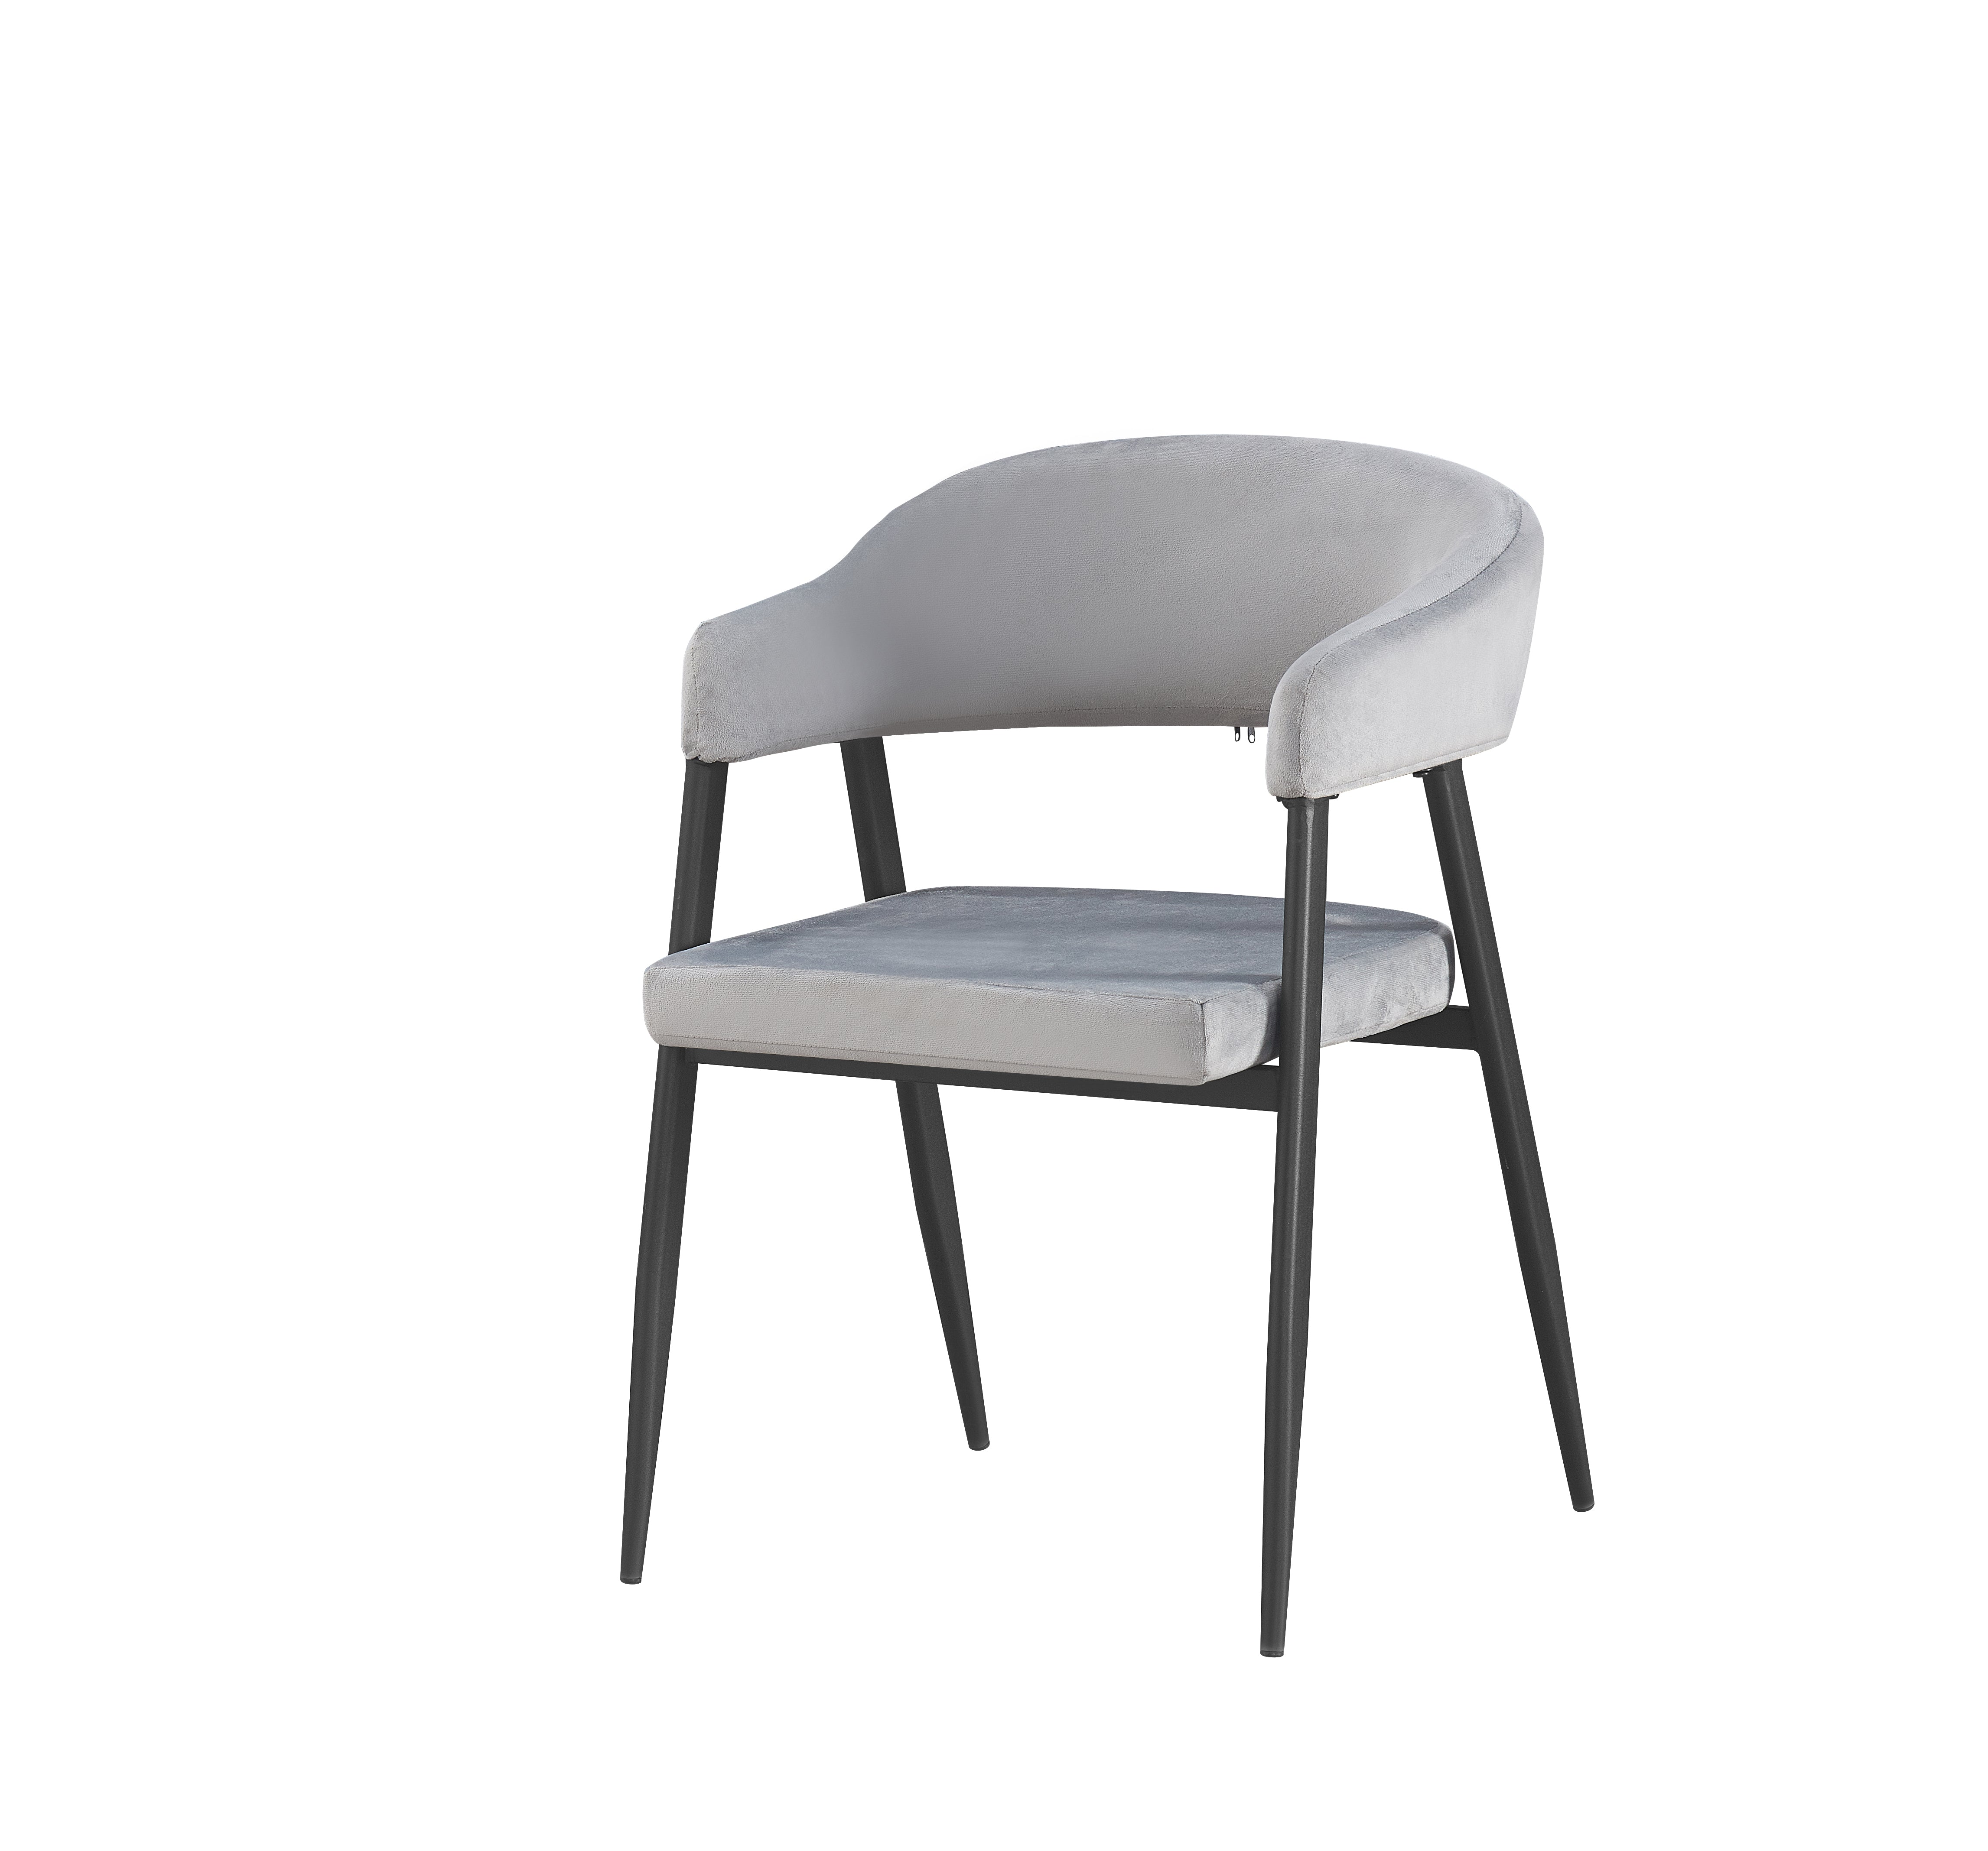 Mia Set of 2 Dining Chairs - Grey